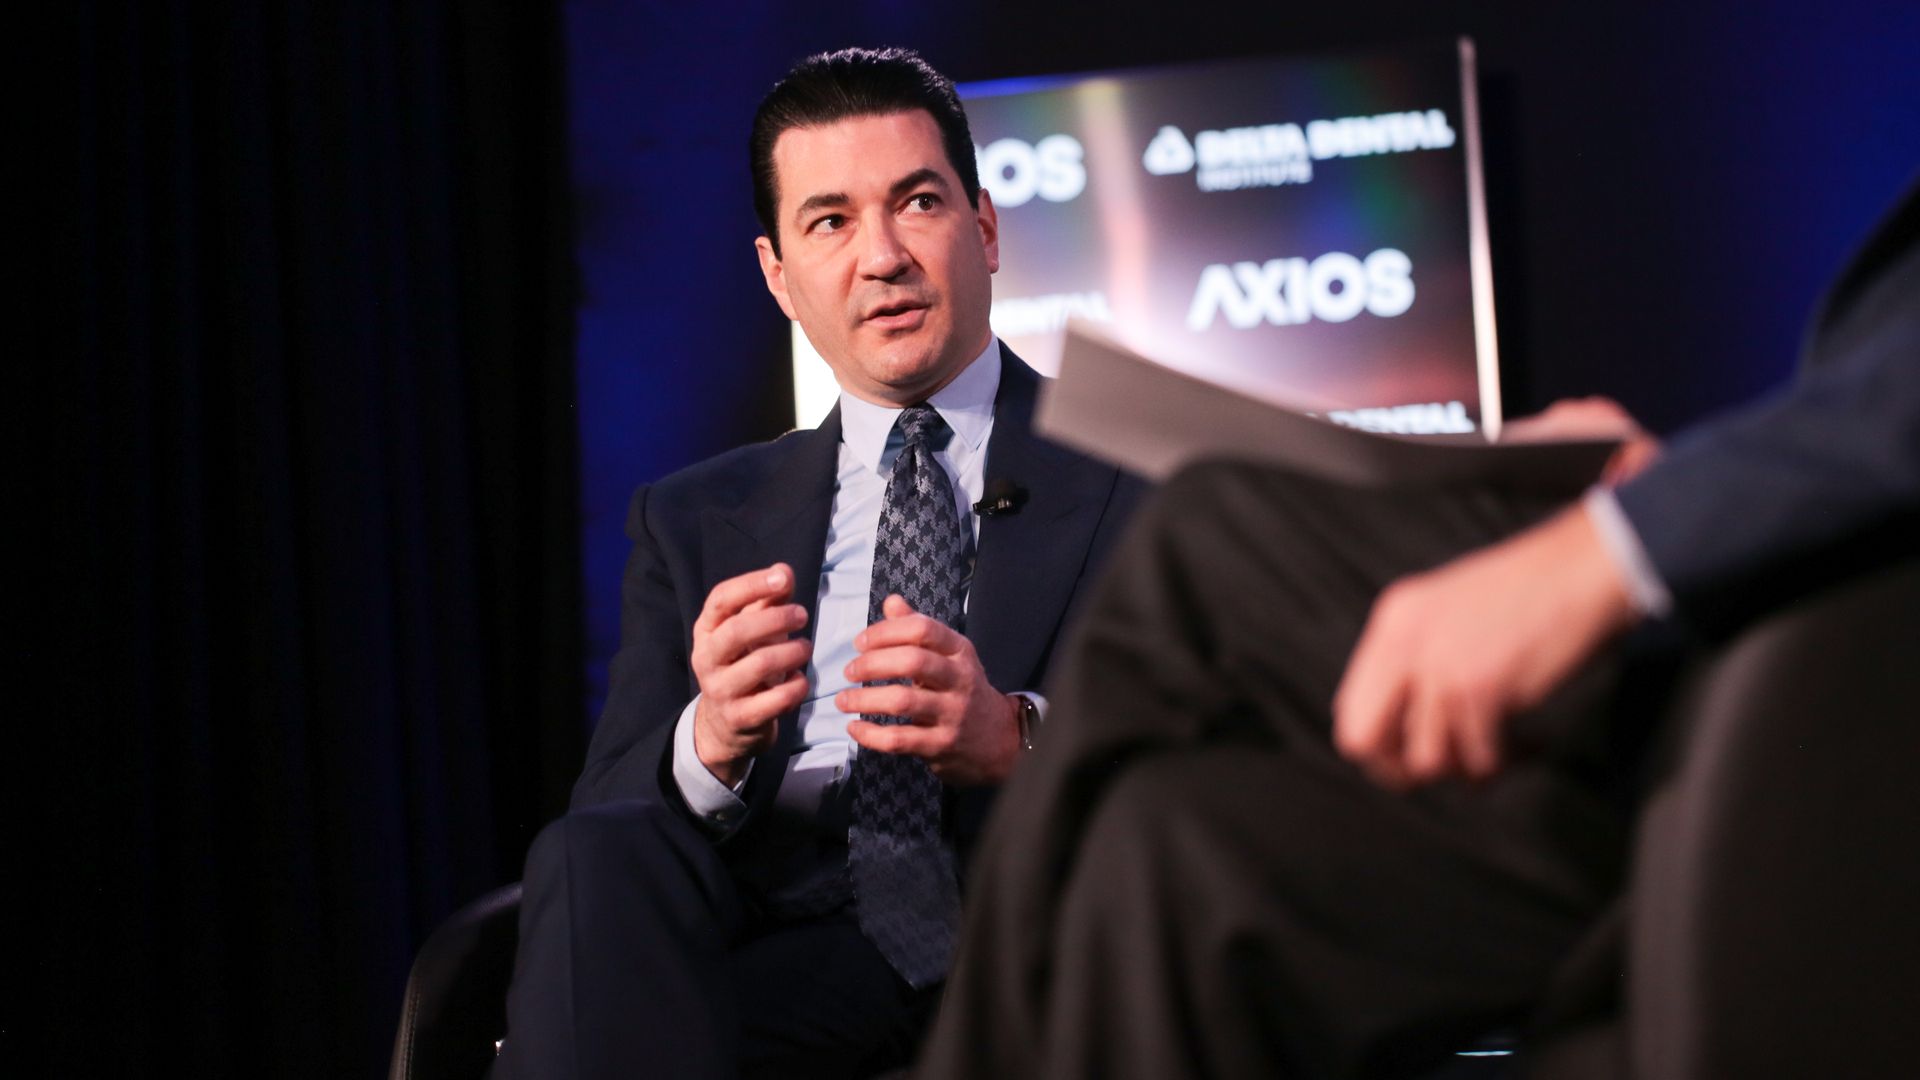 Dr. Scott Gottlieb on the Axios stage.